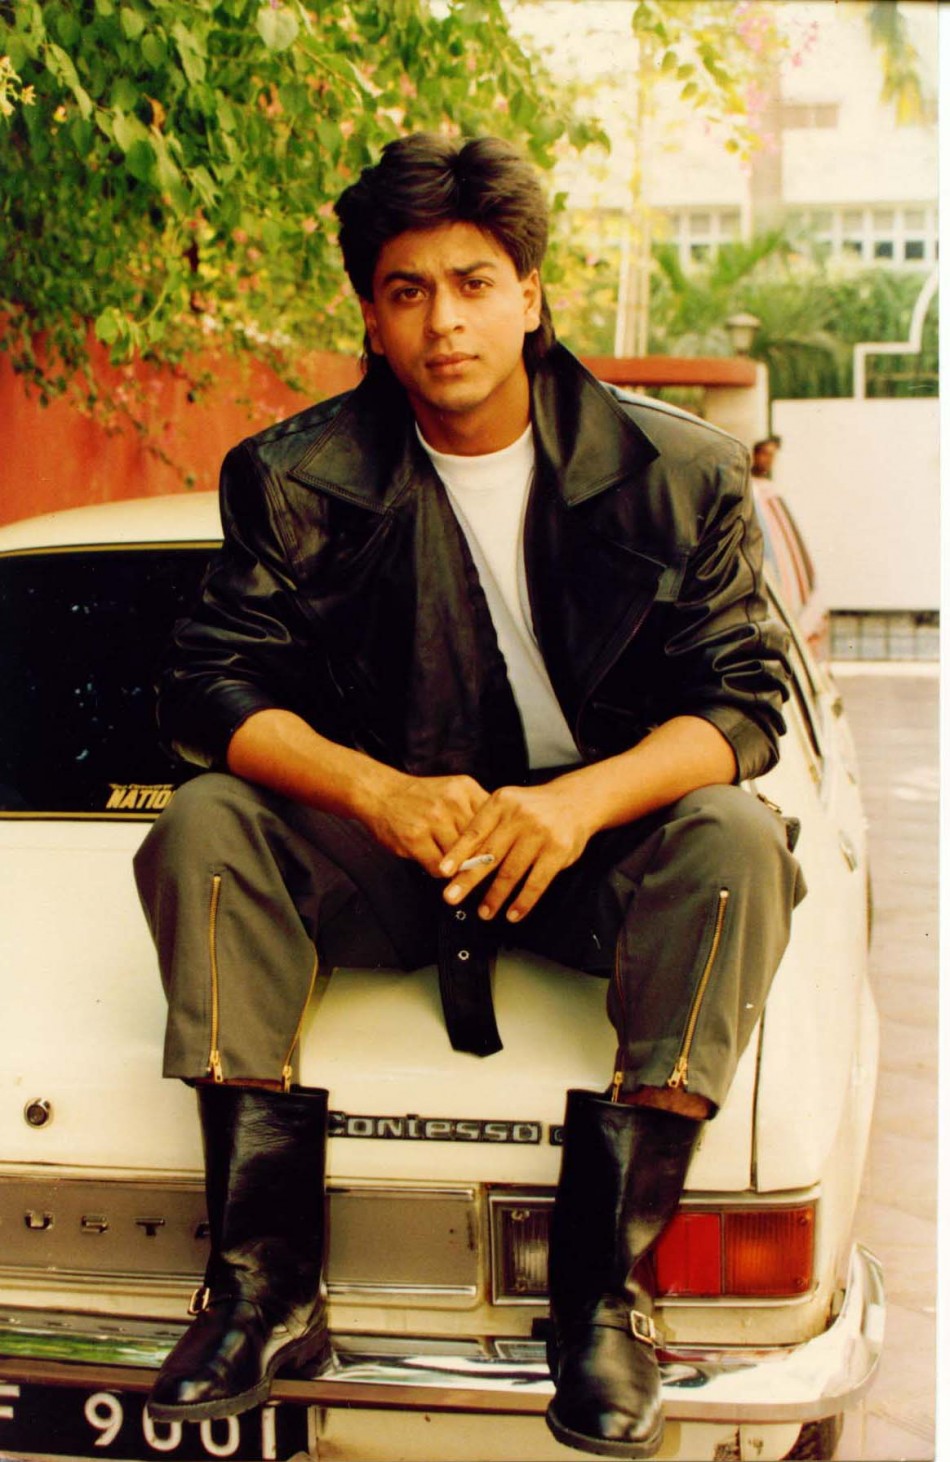 Shah Rukh Khan Celebrates 48th Birthday: Rare Pictures of 'King